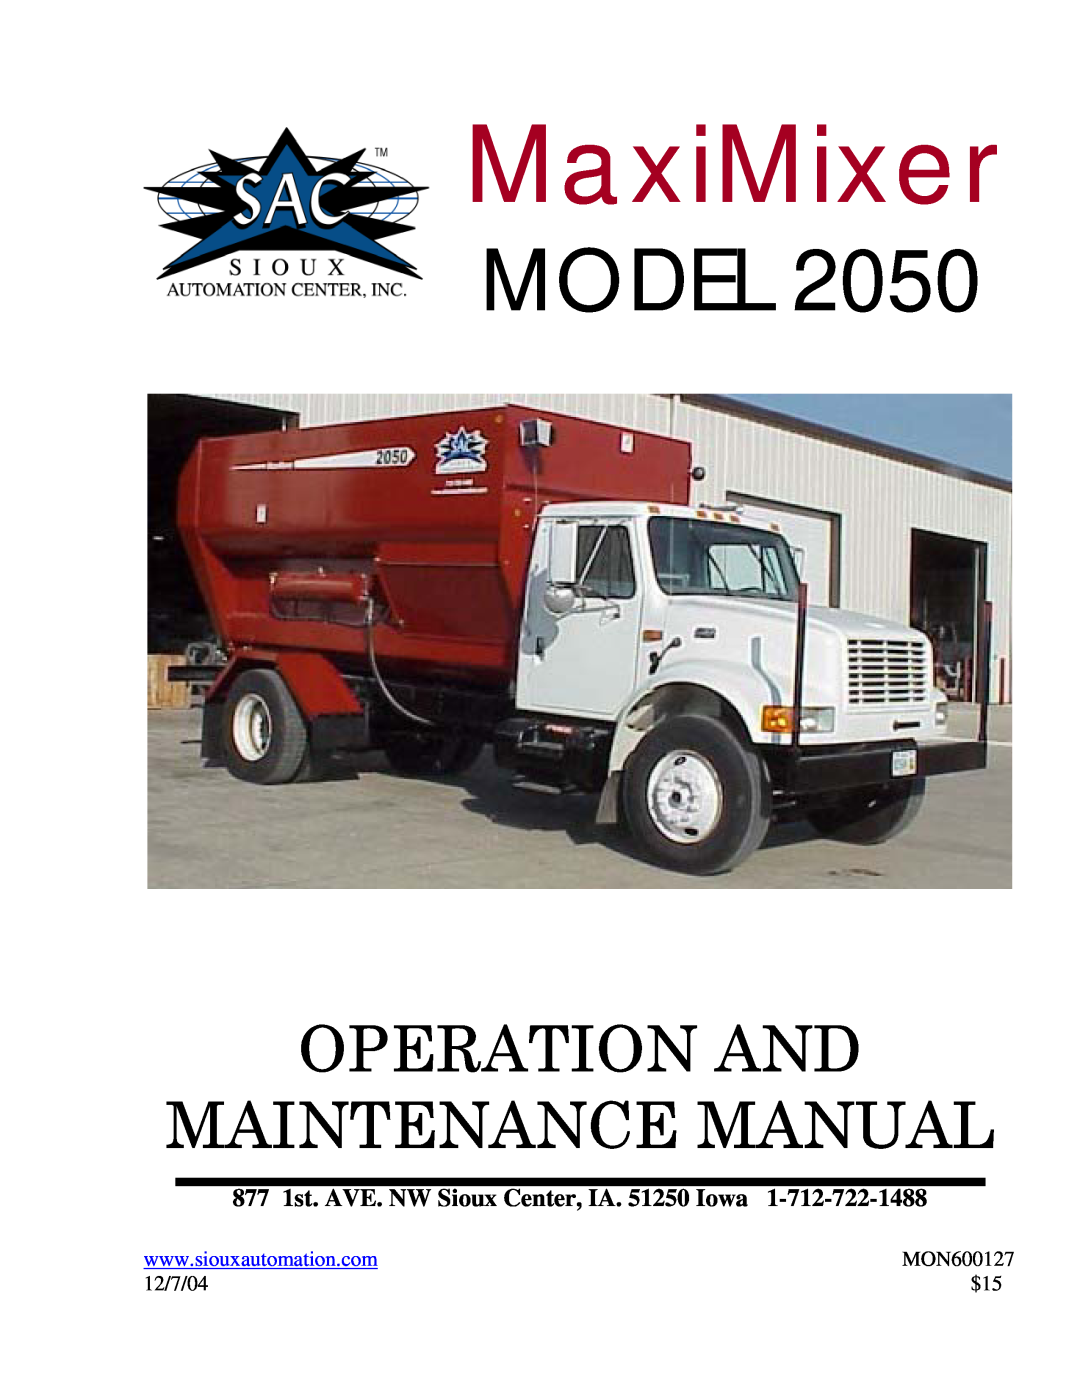 Sioux Tools 2050 manual Model, MaxiMixer, Operation And Maintenance Manual, 877 1st. AVE. NW Sioux Center, IA. 51250 Iowa 